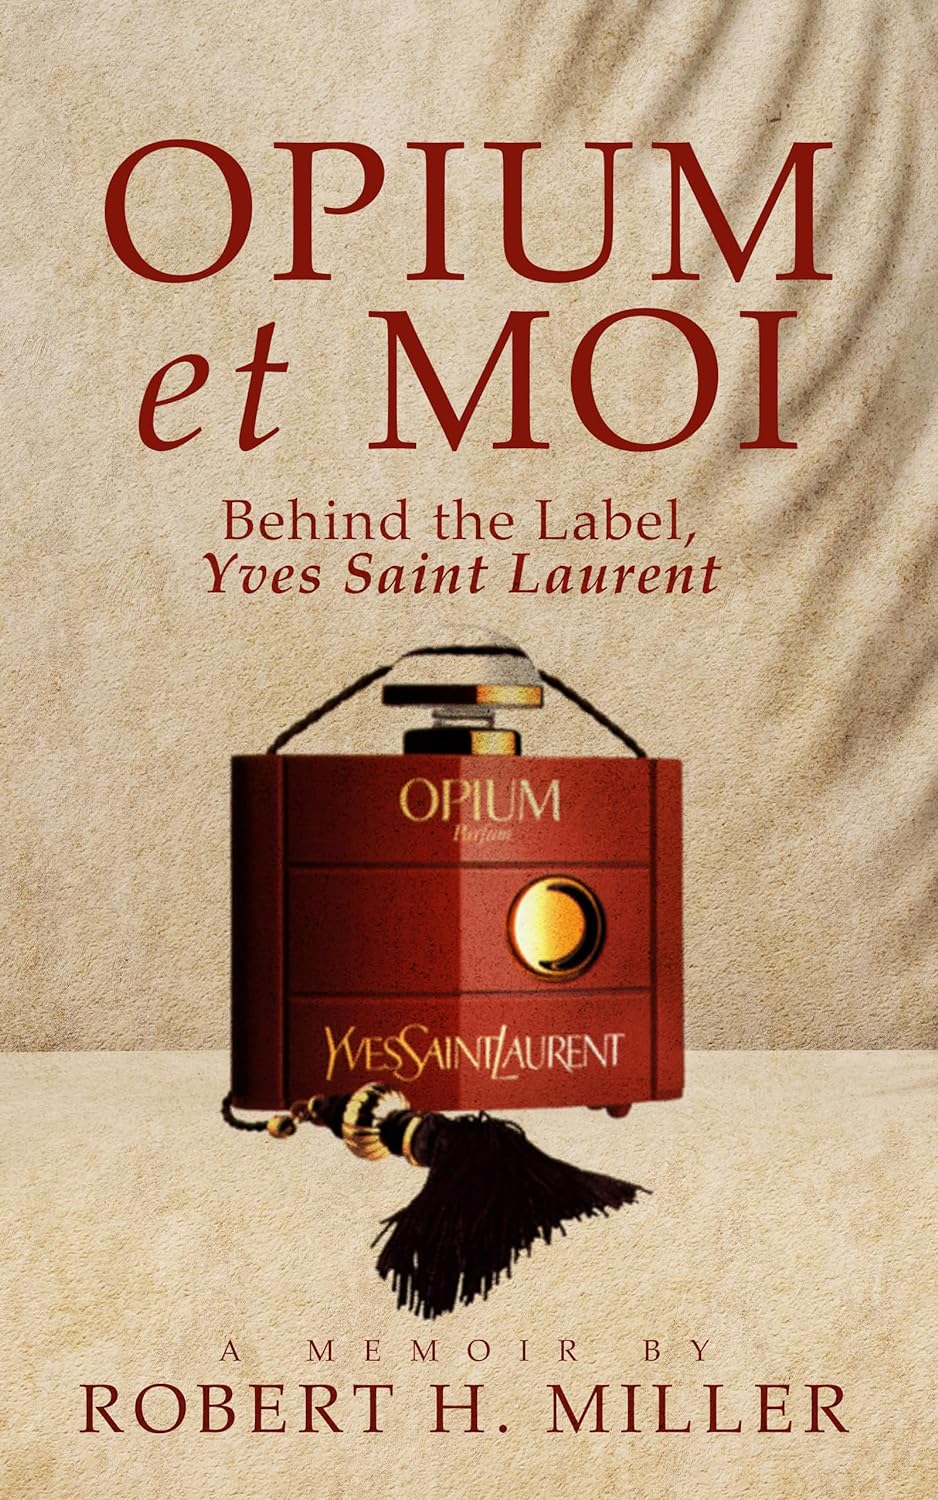 New memoir, "Opium et Moi" by Robert H. Miller is released, the inspiring story of developing one of the world’s most iconic perfumes with Yves Saint Laurent